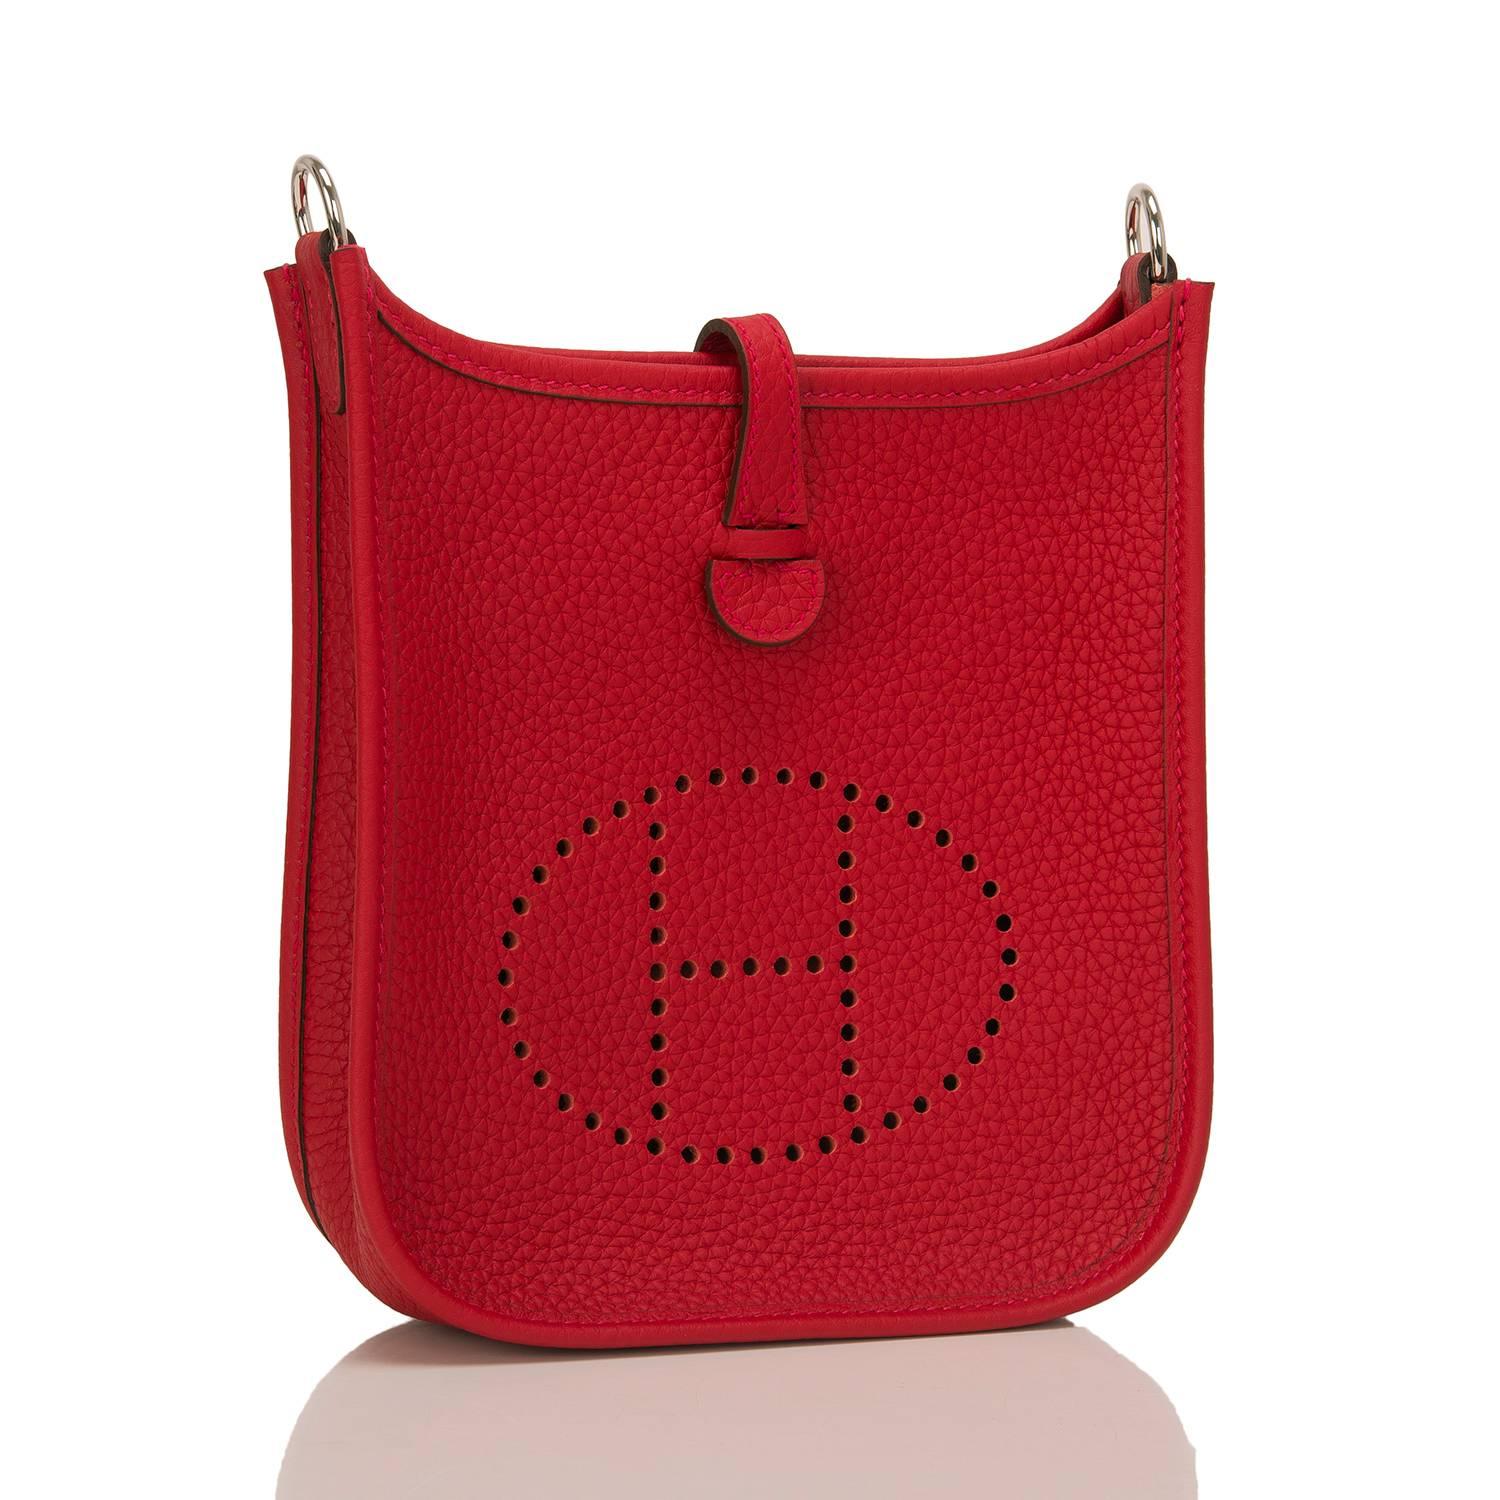  	
Hermes Rouge Casaque Evelyne TPM in clemence leather with bi-color Amazone strap with palladium hardware.

This Rouge Casaque Evelyne TPM features palladium hardware, tonal stitching, large perforated H icon in circle at front, rear pocket, a